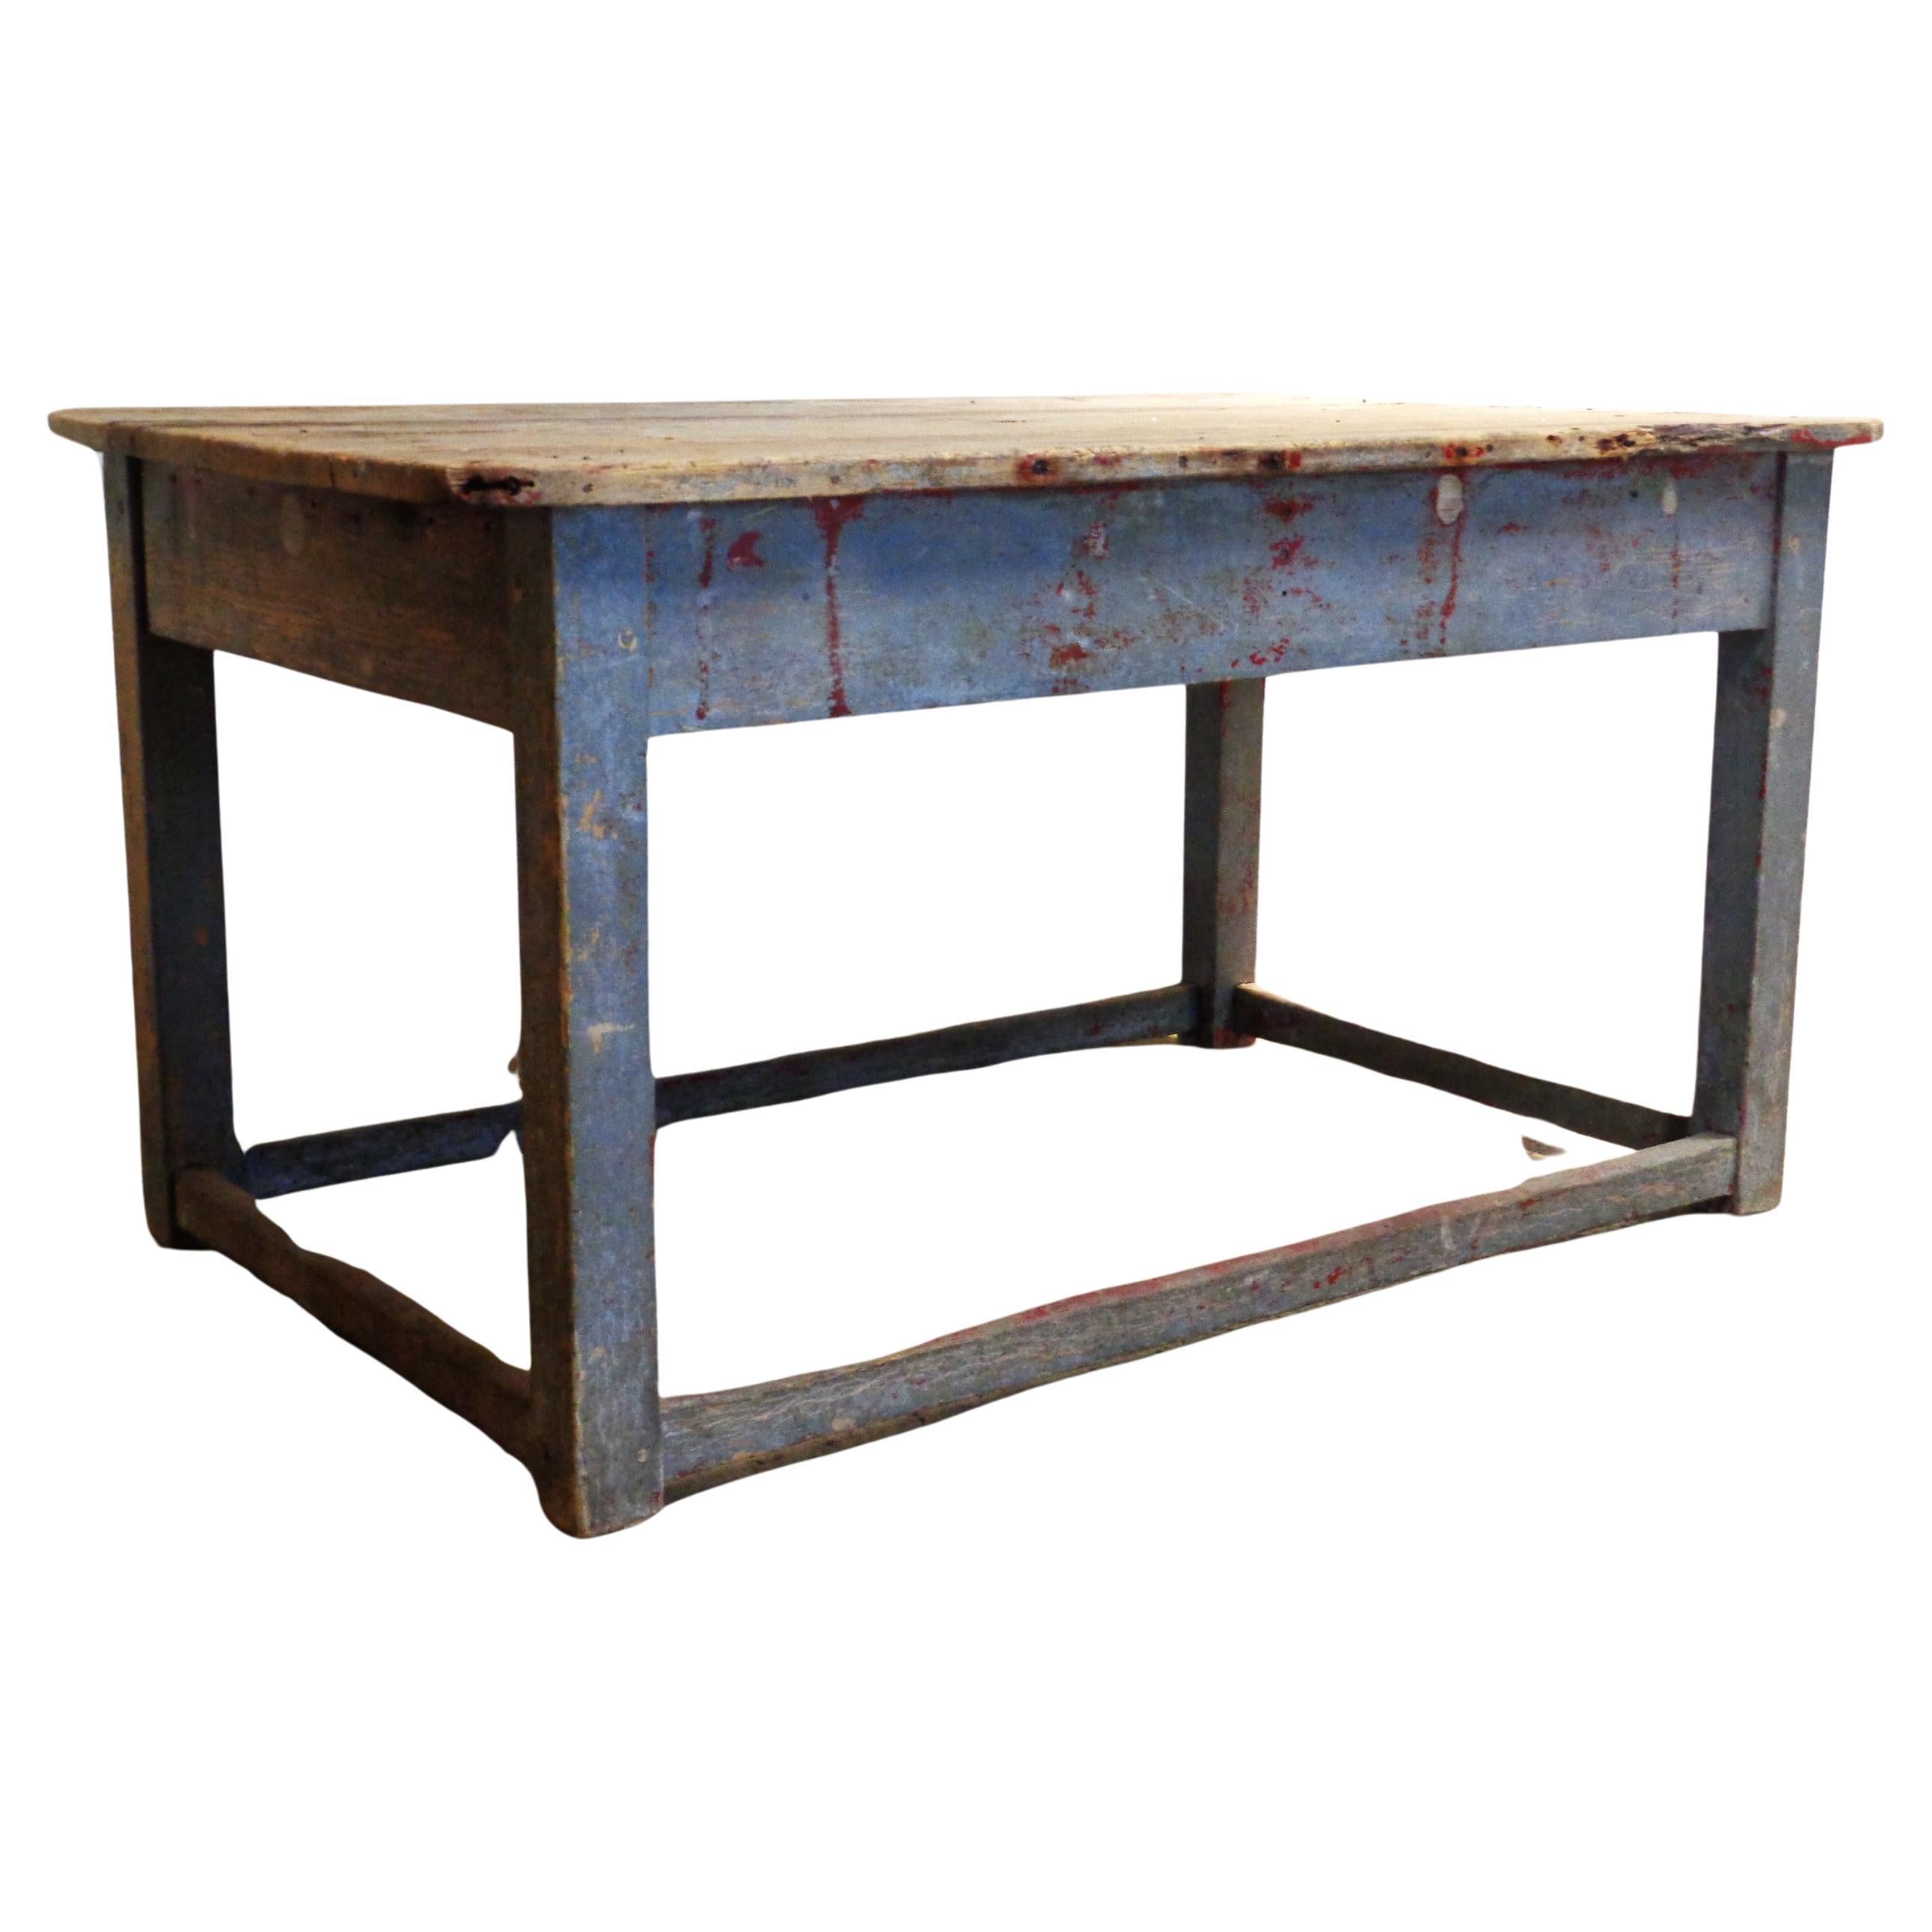  Early 19th Century Original Blue Painted Rustic Work Table 